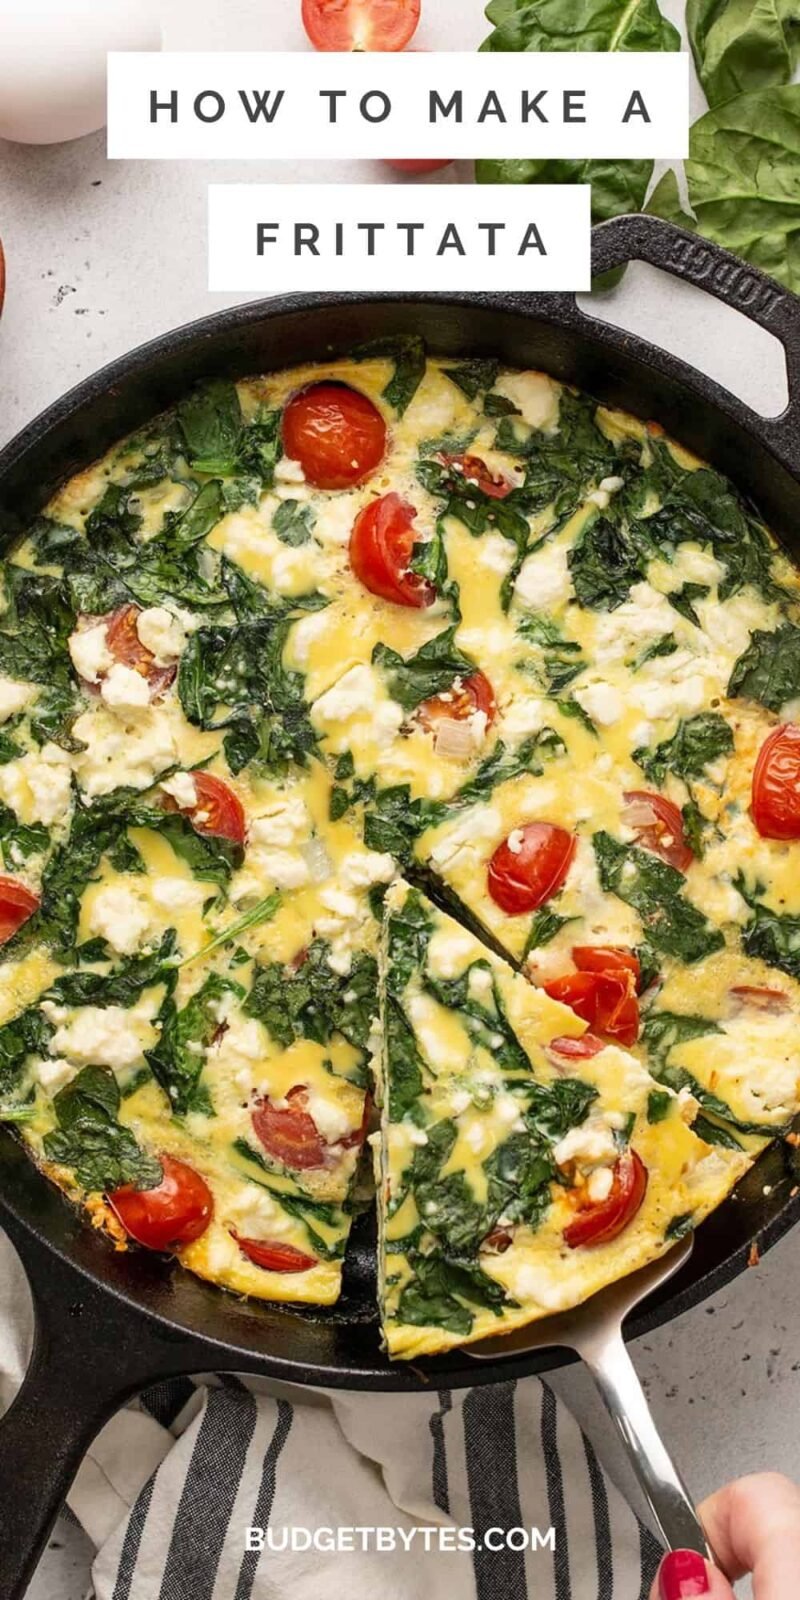 Overhead view of a frittata in a cast iron skillet.